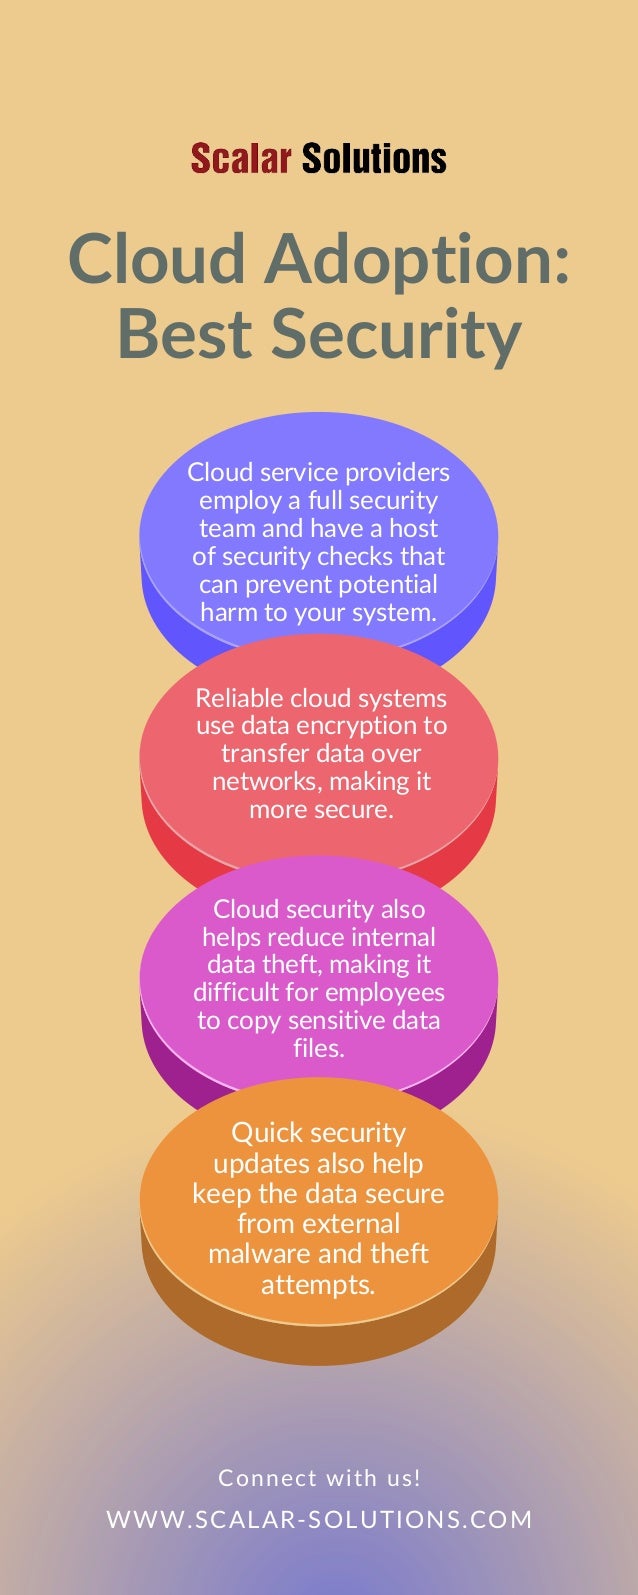 Reliable cloud systems
use data encryption to
transfer data over
networks, making it
more secure.
Cloud Adoption:
Best Security
Cloud service providers
employ a full security
team and have a host
of security checks that
can prevent potential
harm to your system.
Cloud security also
helps reduce internal
data theft, making it
difficult for employees
to copy sensitive data
files.
Quick security
updates also help
keep the data secure
from external
malware and theft
attempts.
WWW.SCALAR-SOLUTIONS.COM
Connect with us!
 